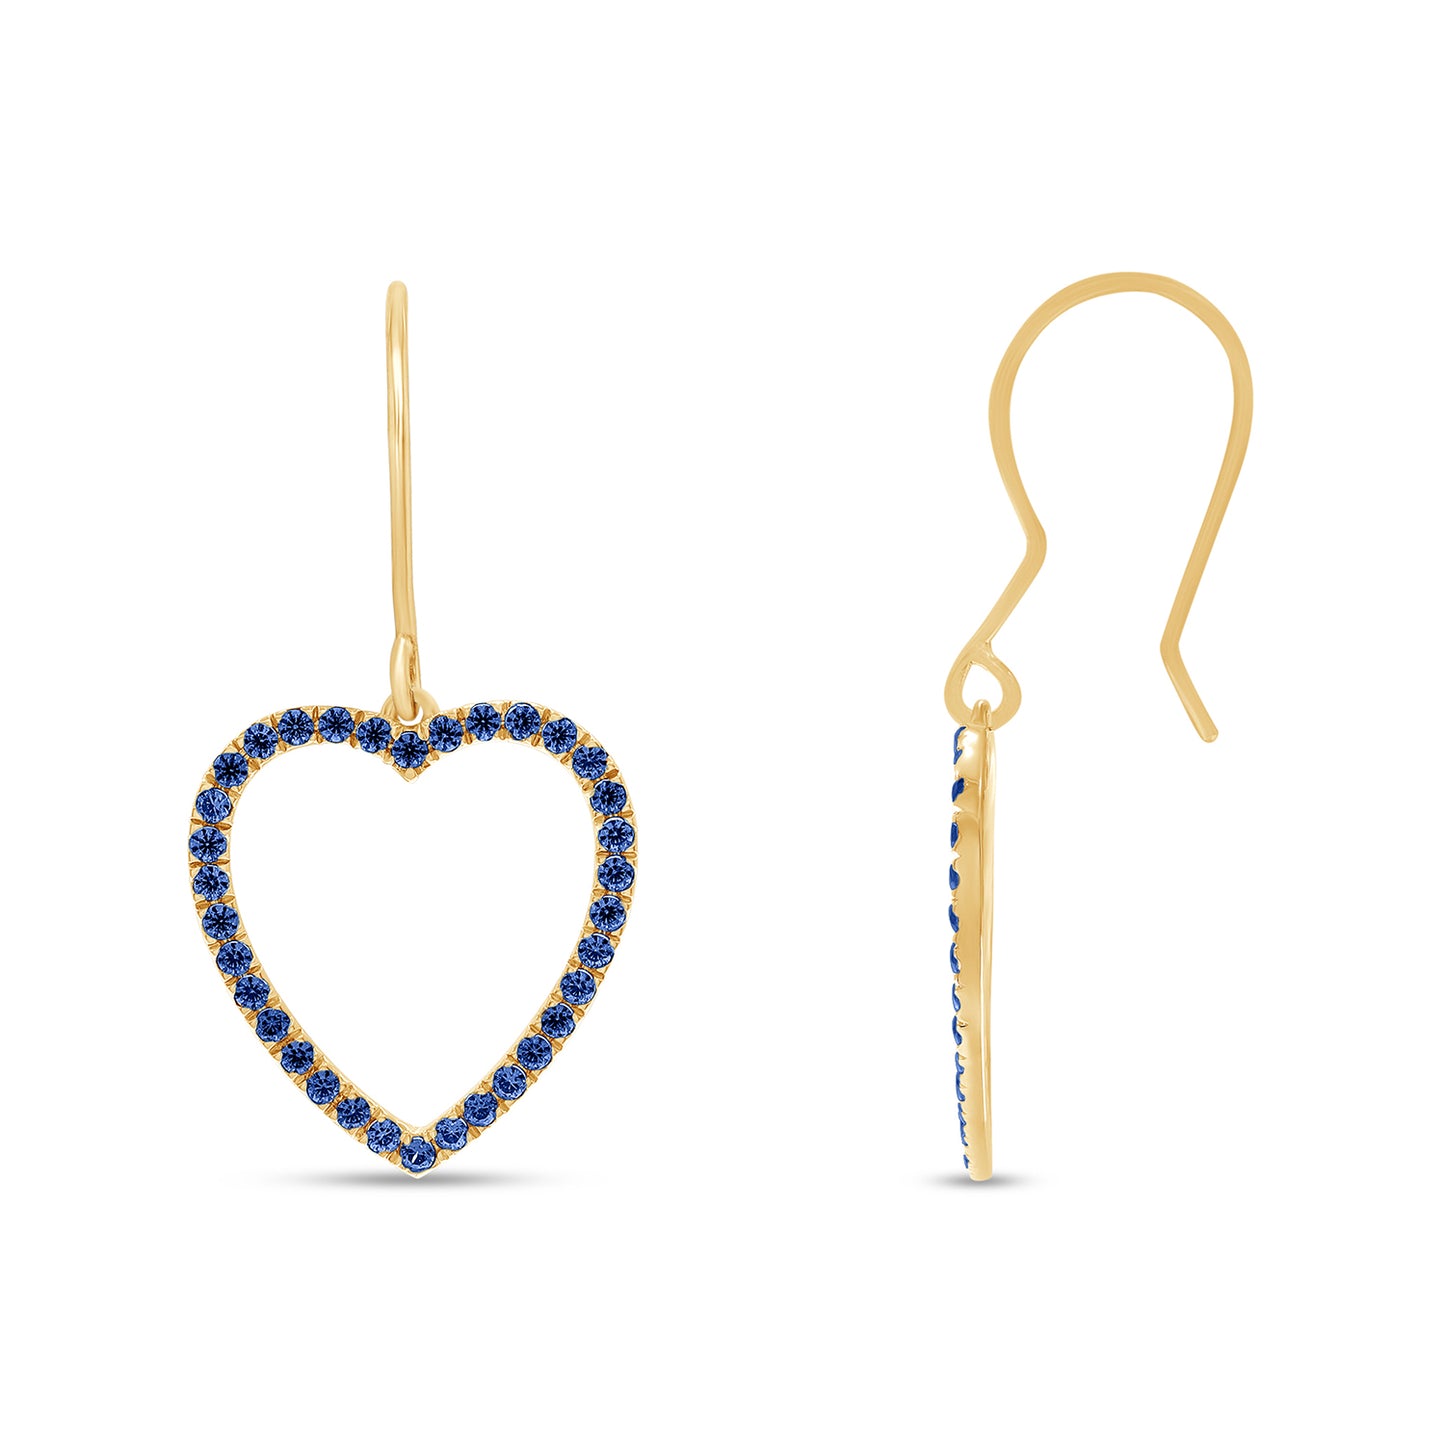 Round Cut Simulated Blue Sapphire Open Heart Drop Earrings For Womens In 10K Or 14K Solid Gold And 925 Sterling Silver